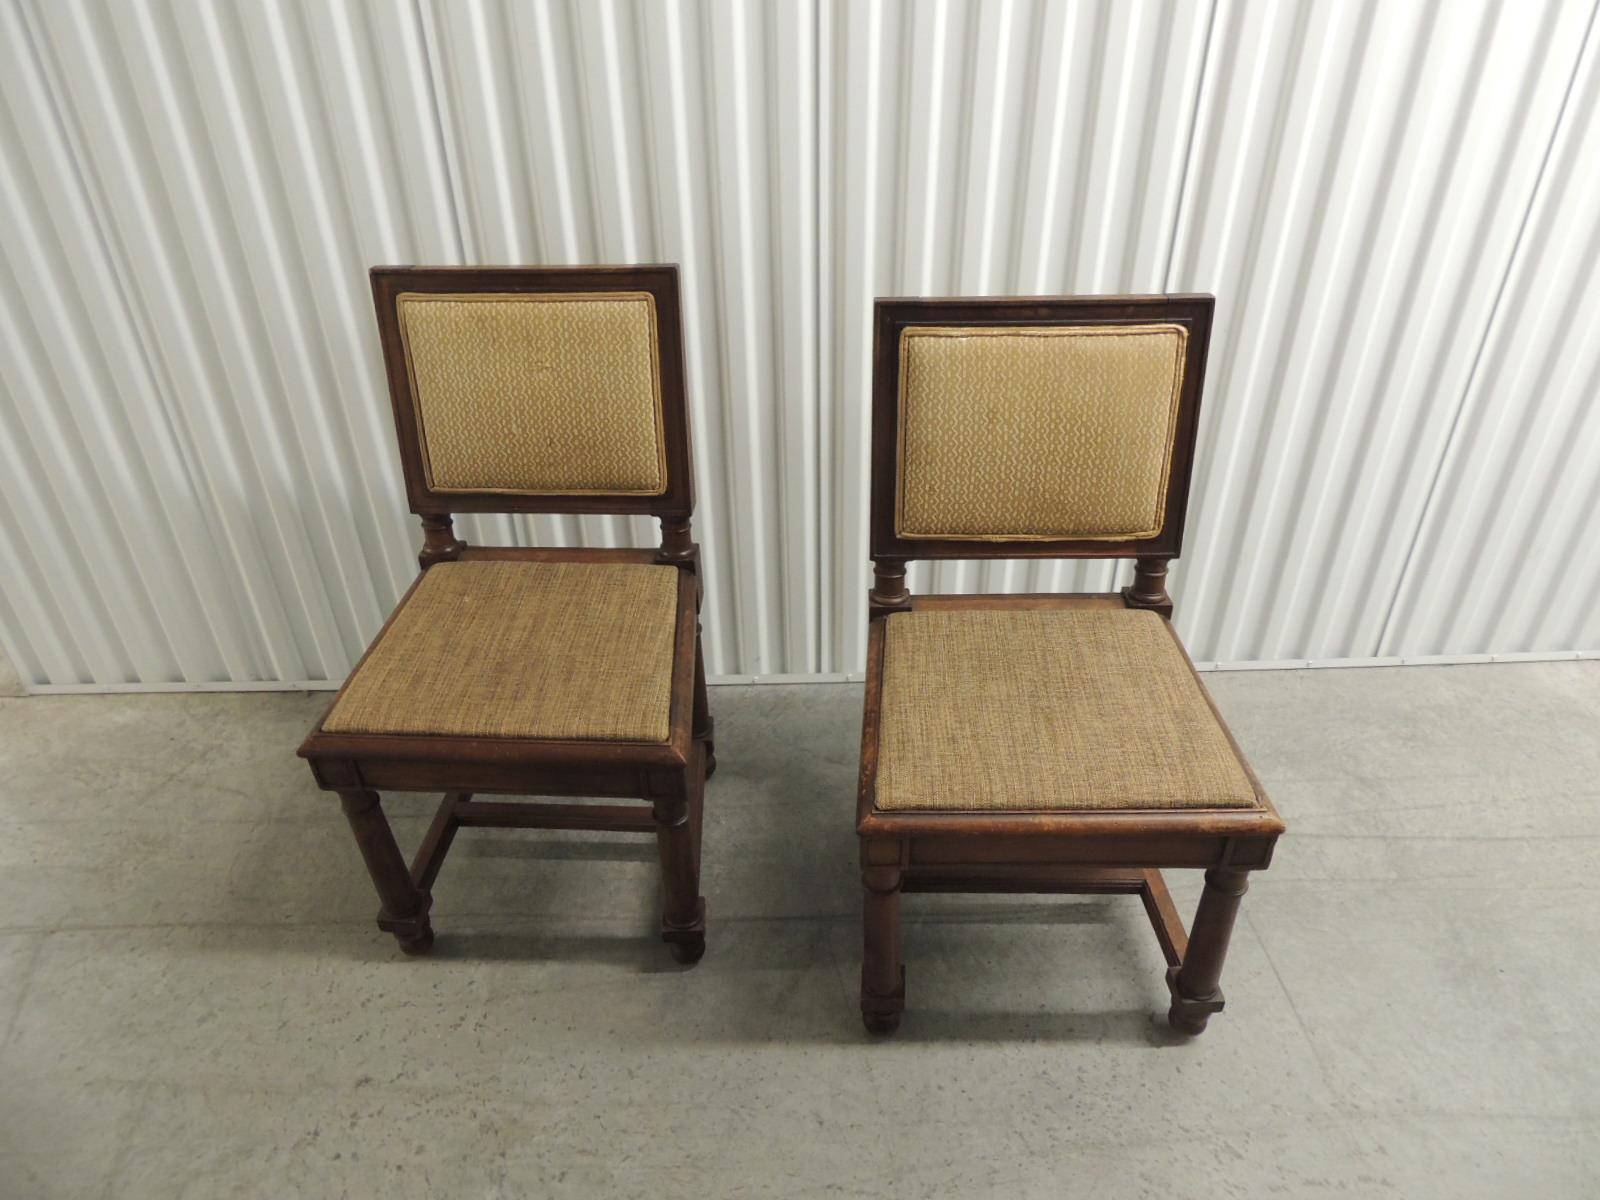 English wooden chairs upholstered in Fortuny Tapa fabric. The fabric is on back front of the chair and inset in the back, self welt.
Rounded wooden legs. The fabric color is yellow on maize. The seat is upholstered in chenille (needs new